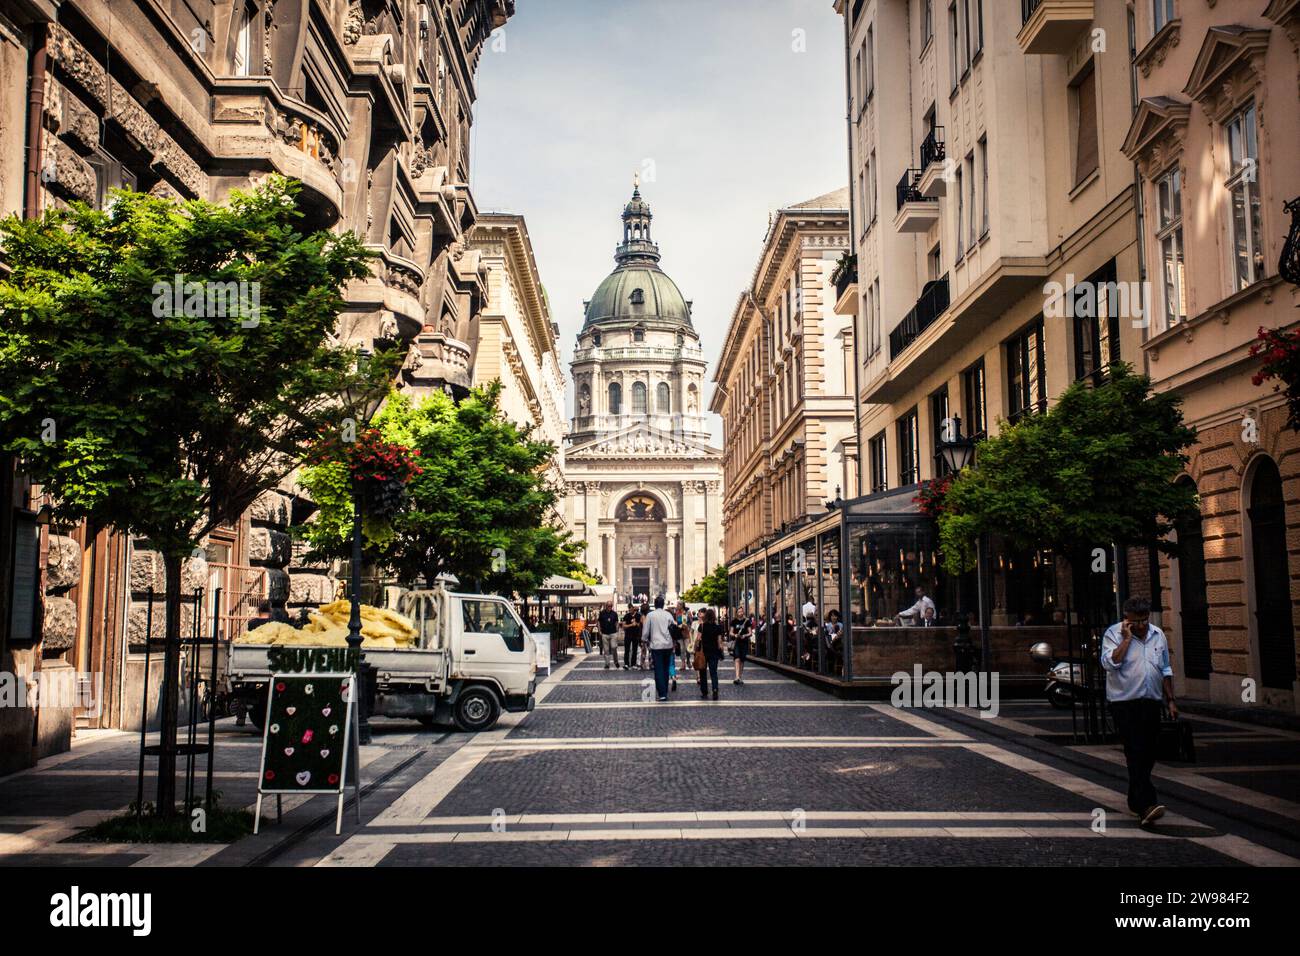 Pedestrian walking street with restaurants and shops in Budapest, Hungary. Stock Photo